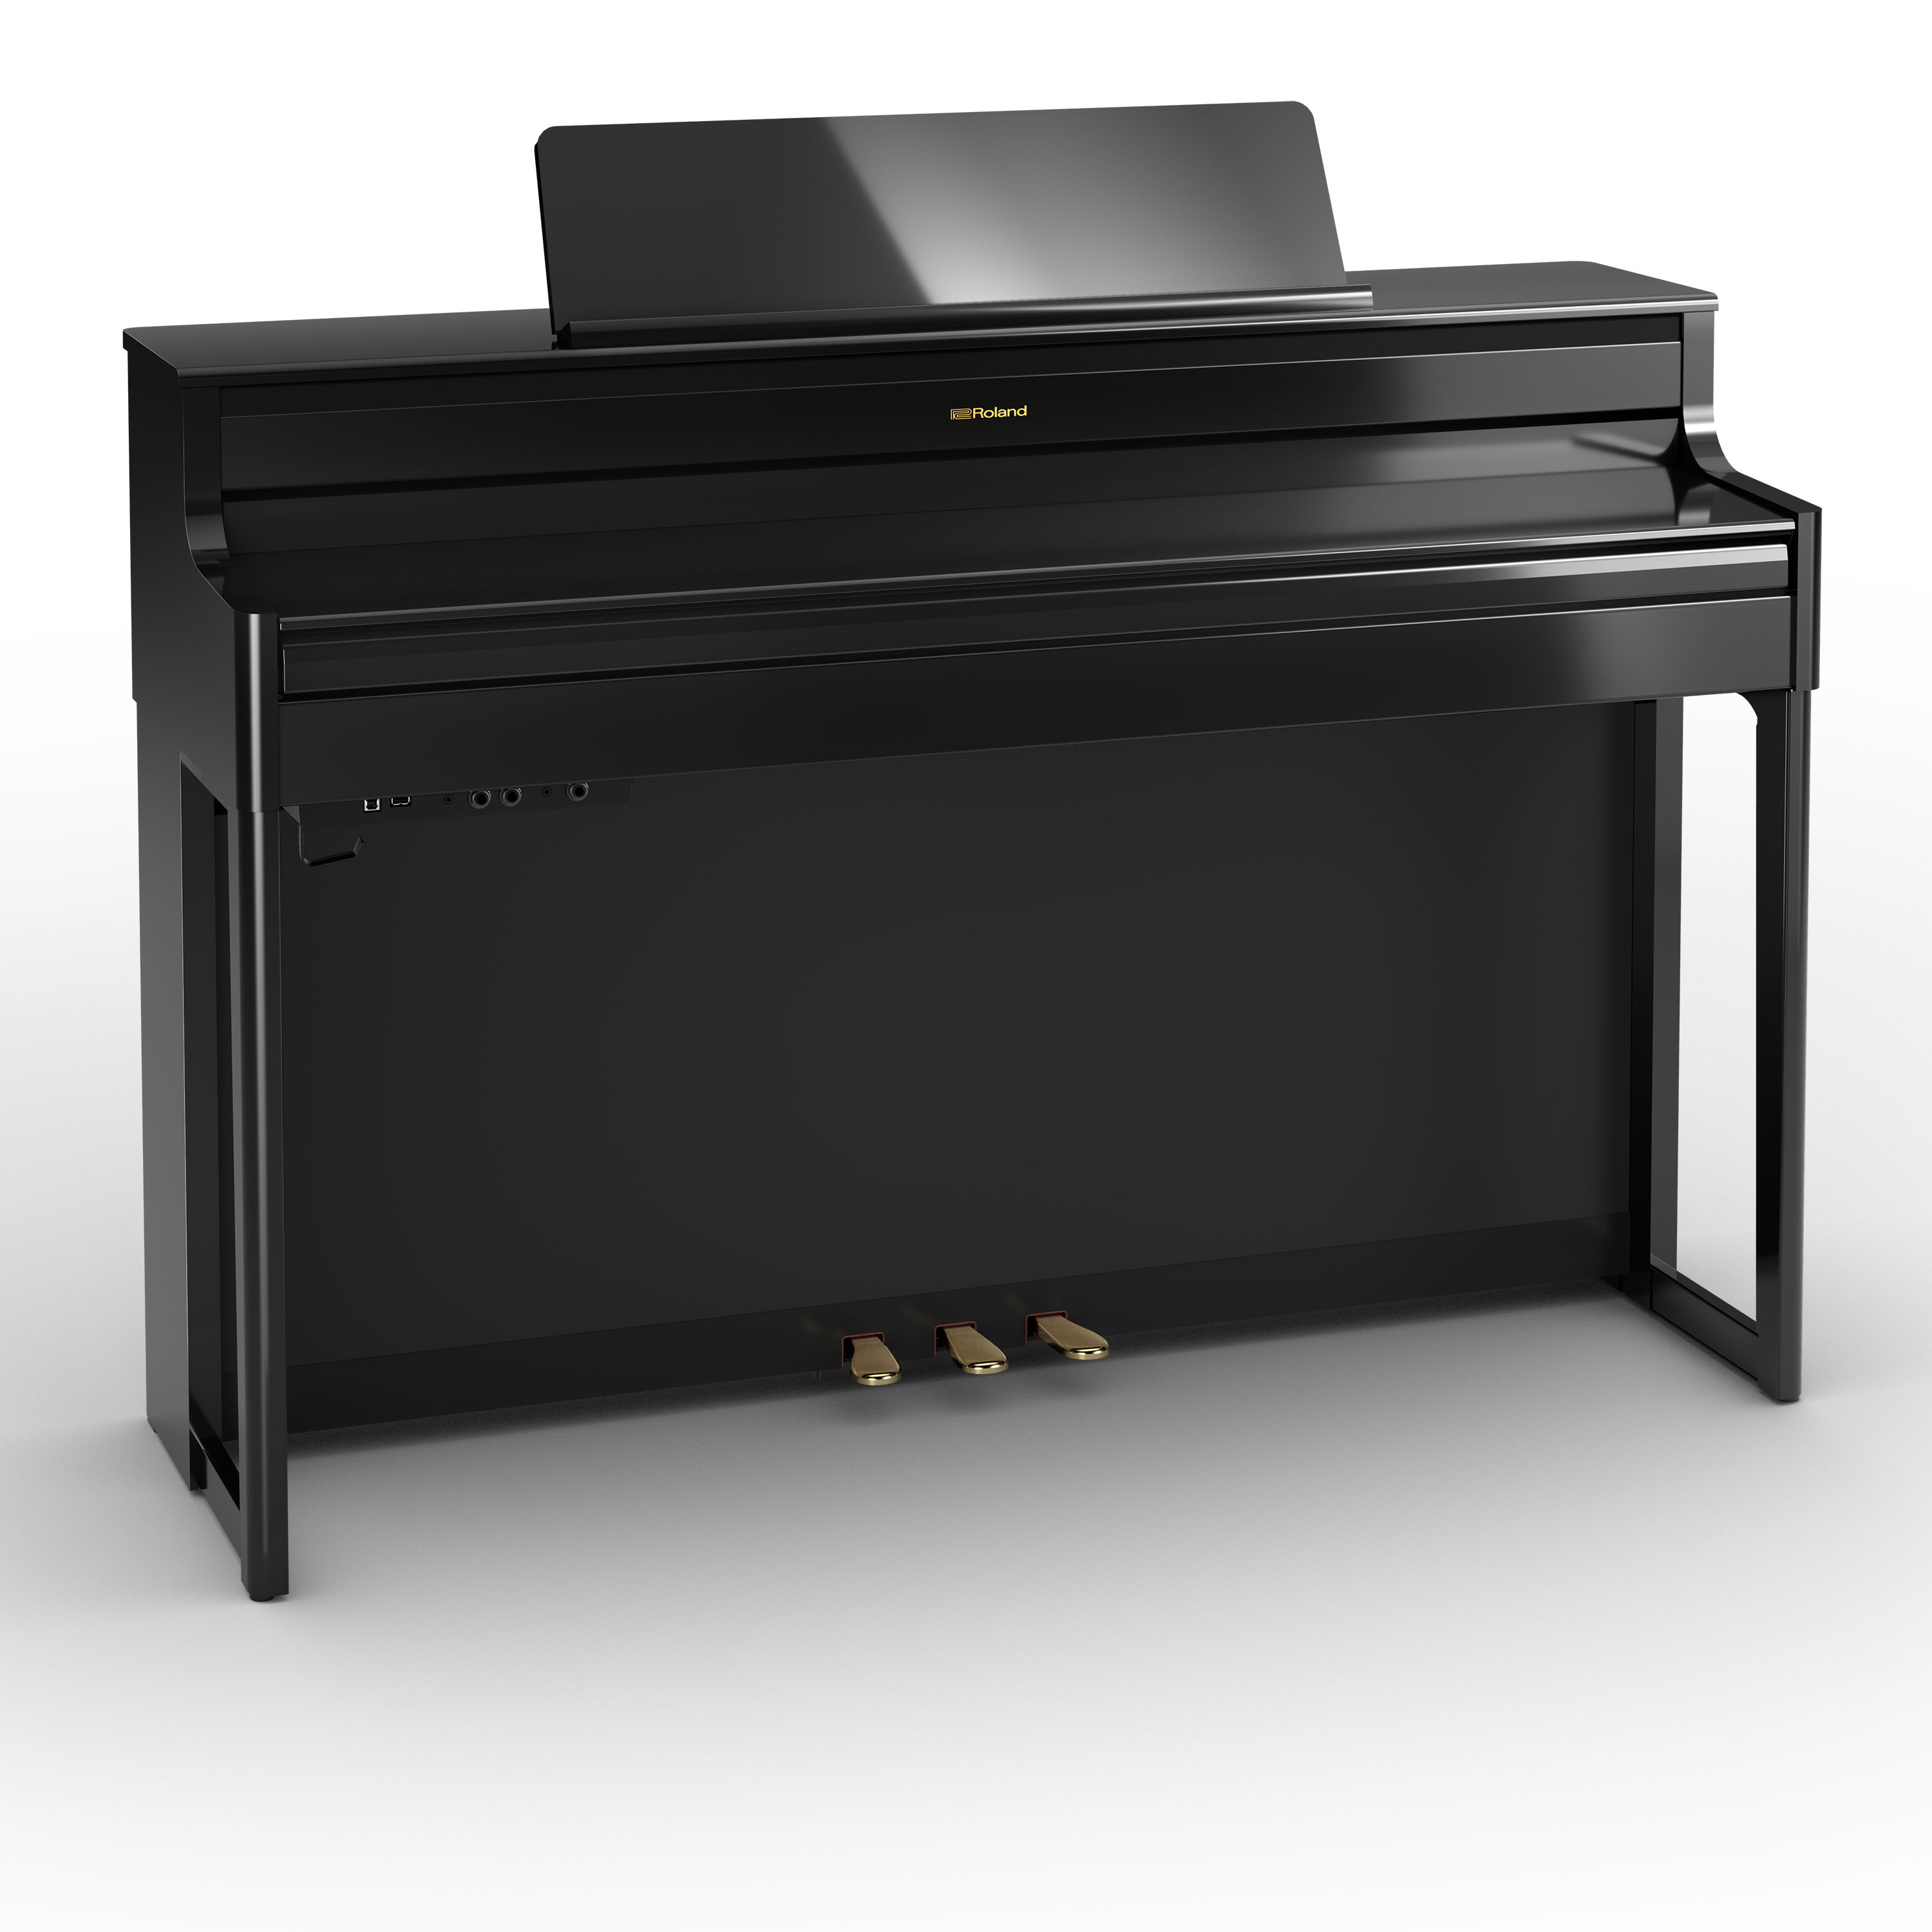 Roland Hp704 Pe - Noir Laqu? - Digital piano with stand - Variation 1